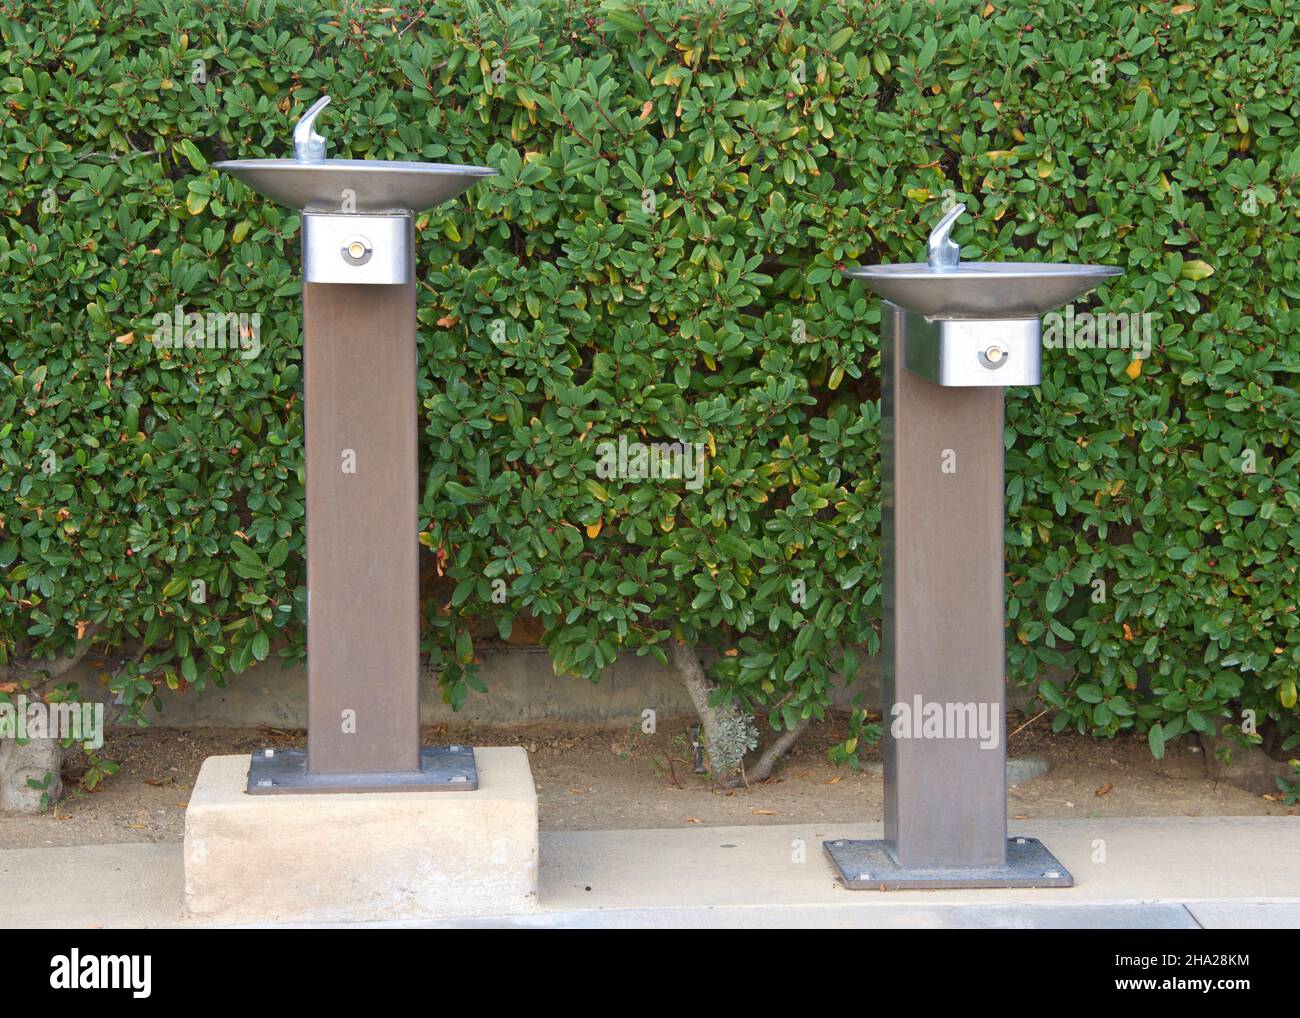 Two stainless steel drinking fountains outdoors against wall of bushes. Stock Photo